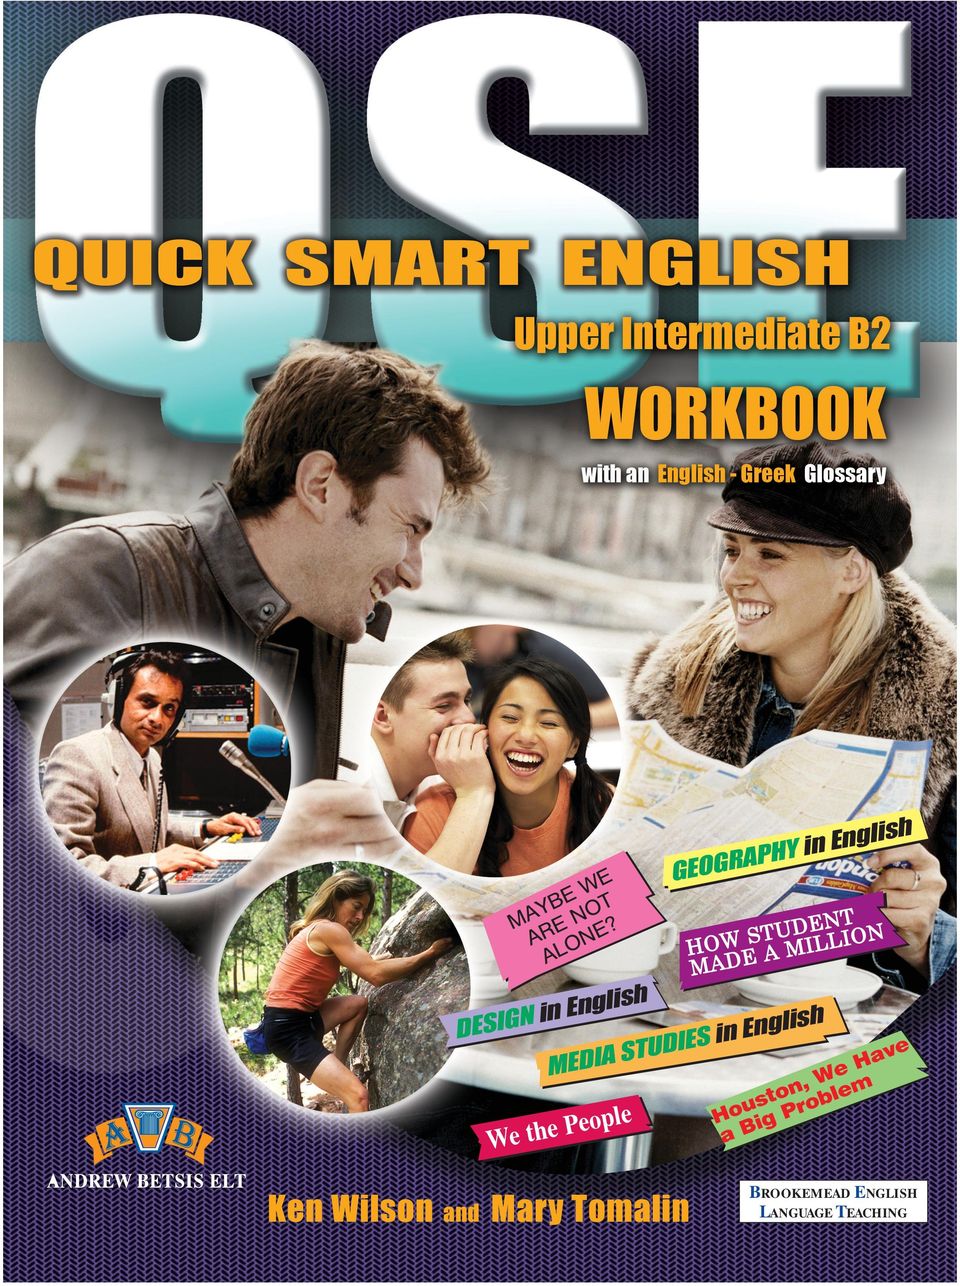 QS provides extensive practice of all four language learning skills, particularly speaking, aided by Language banks which can be found on the fold-out cover flaps and in the WORKOOK.